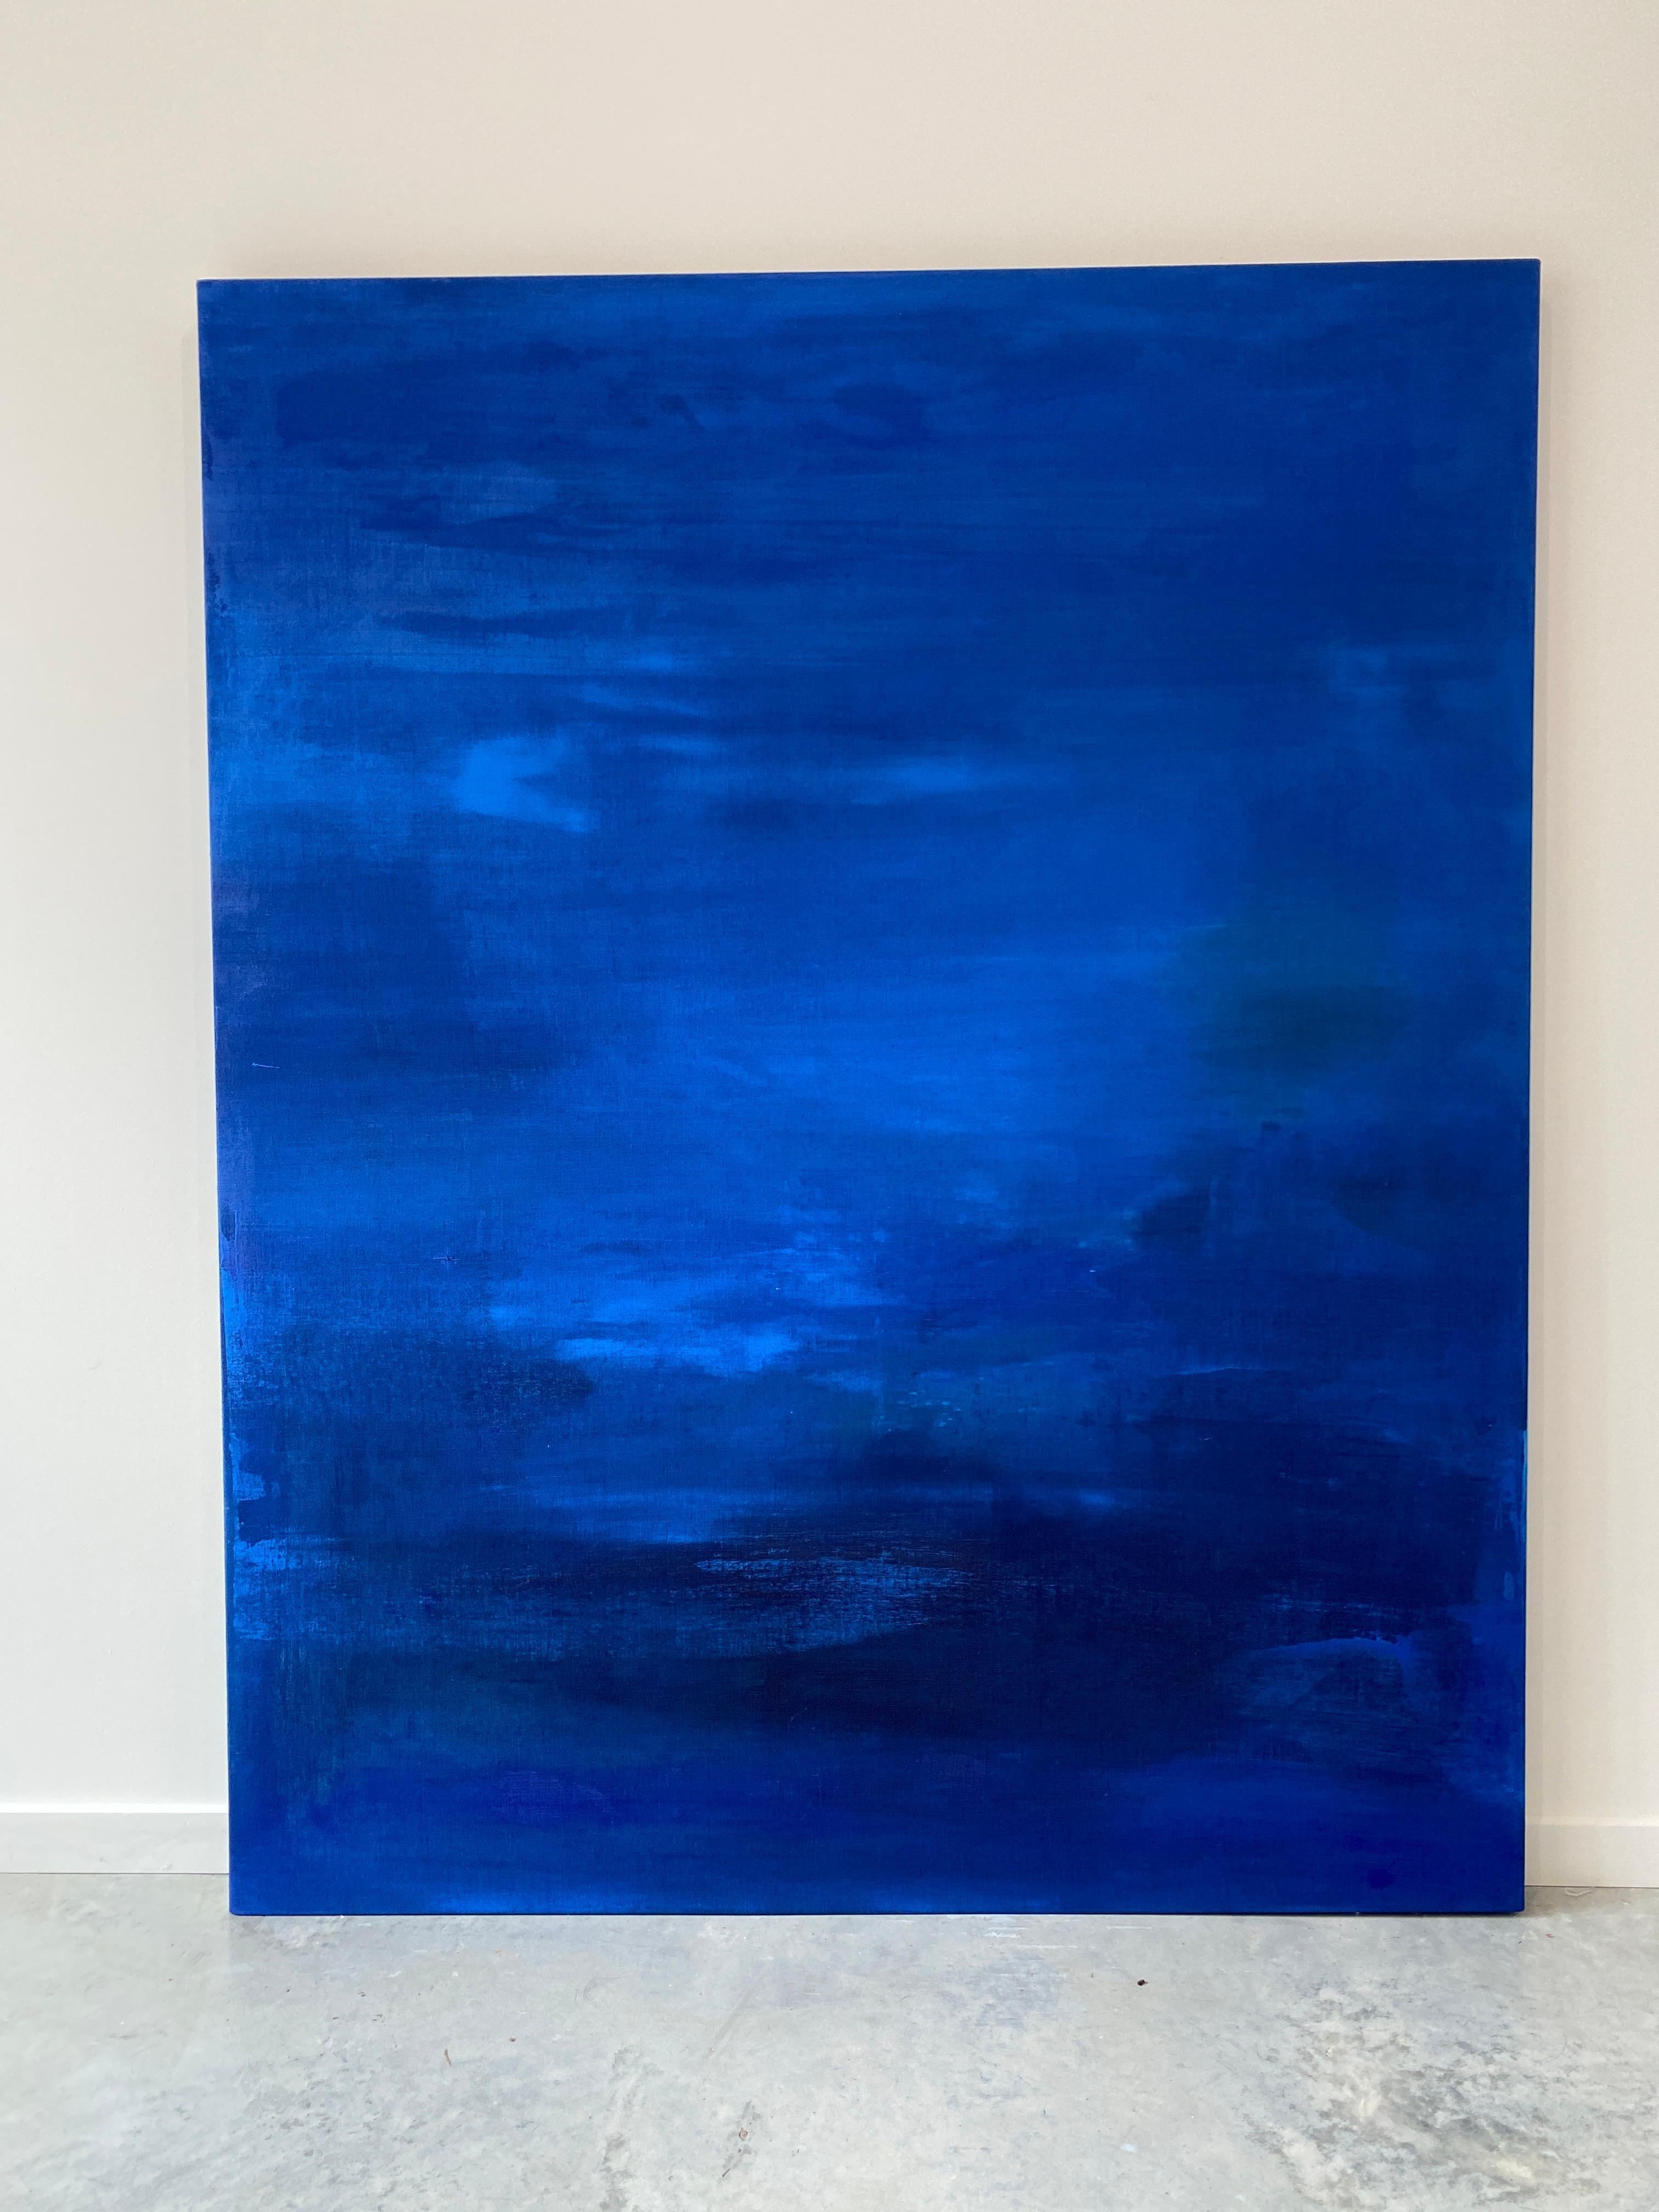 Big Blue cobalt large scale minimalist abstract painting statement artwork For Sale 3